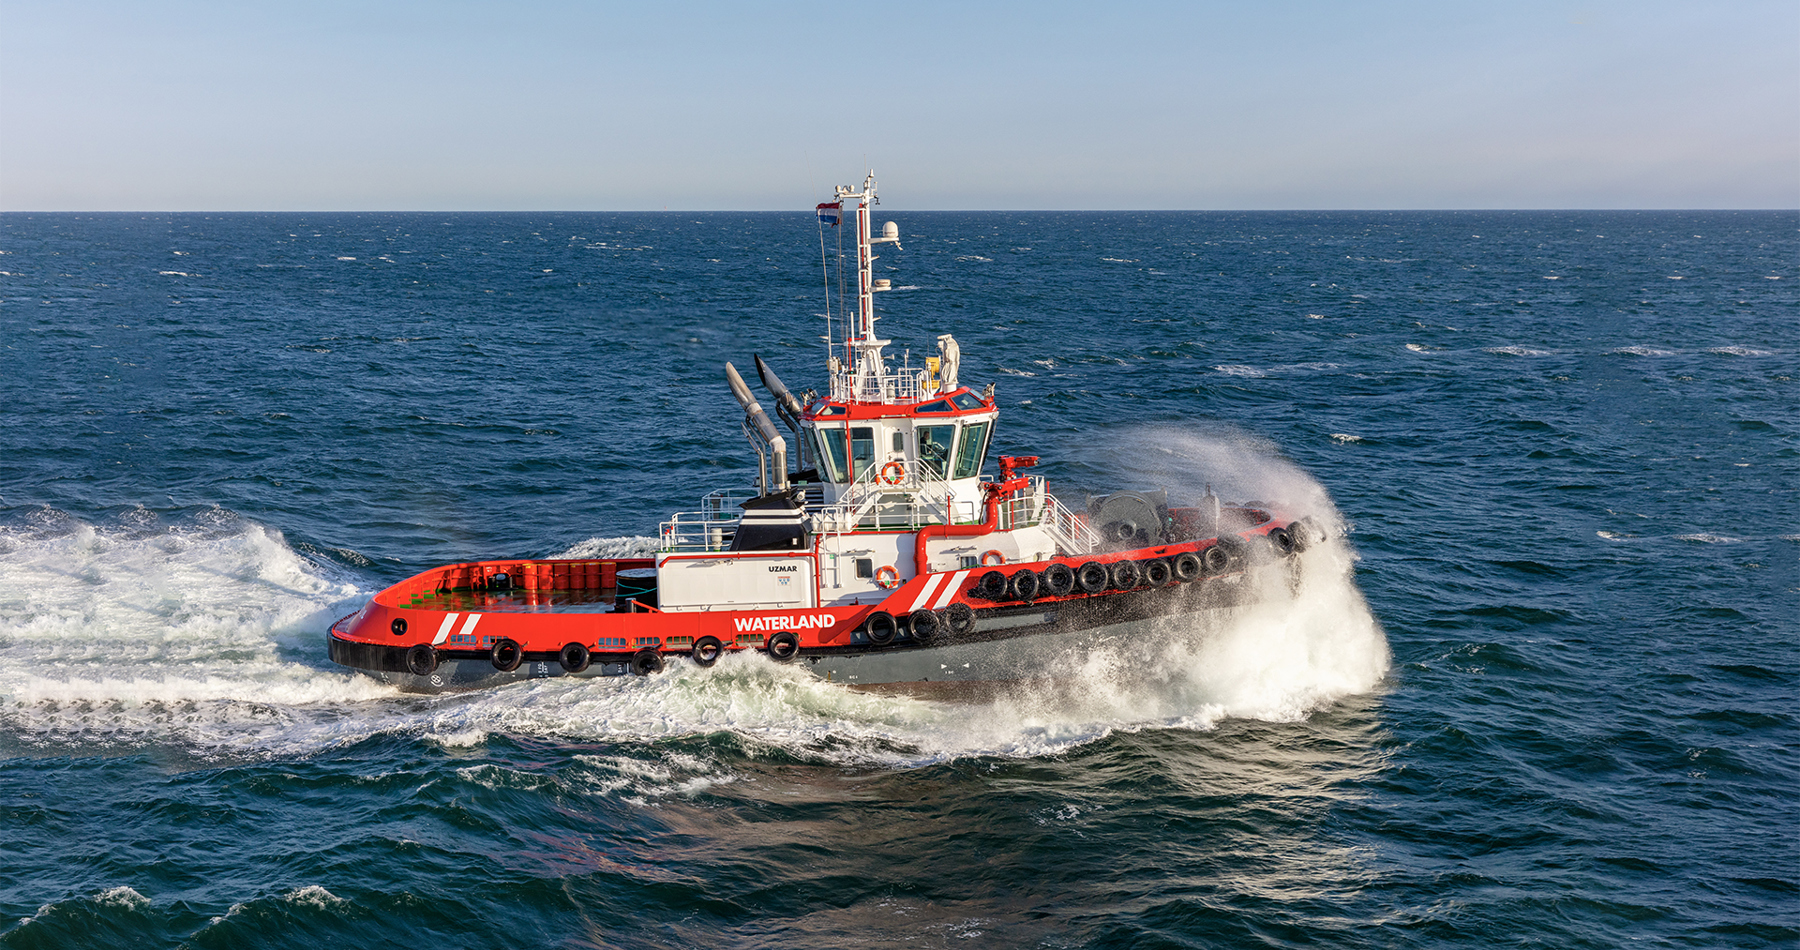 Wagenborg adds another 80 ton bollard pull tug to fleet in Eemshaven